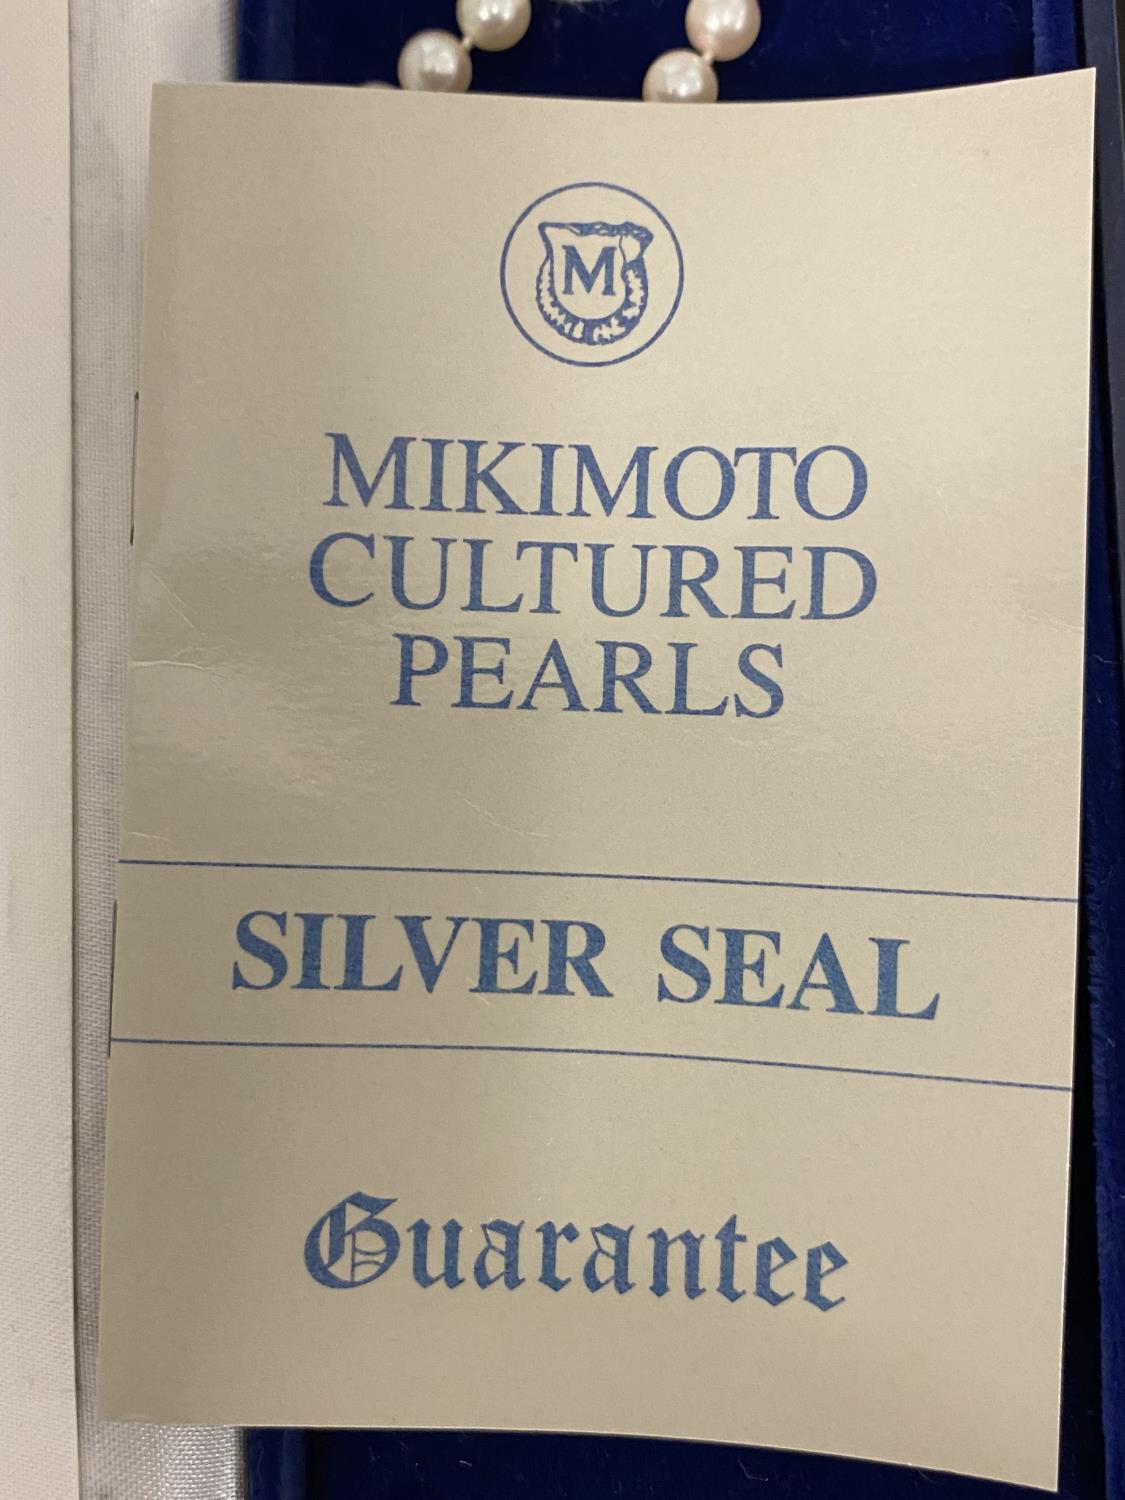 A single strand of cultured uniform pearls by Mikimoto on a 9ct gold clasp with box and certificate, - Image 5 of 5